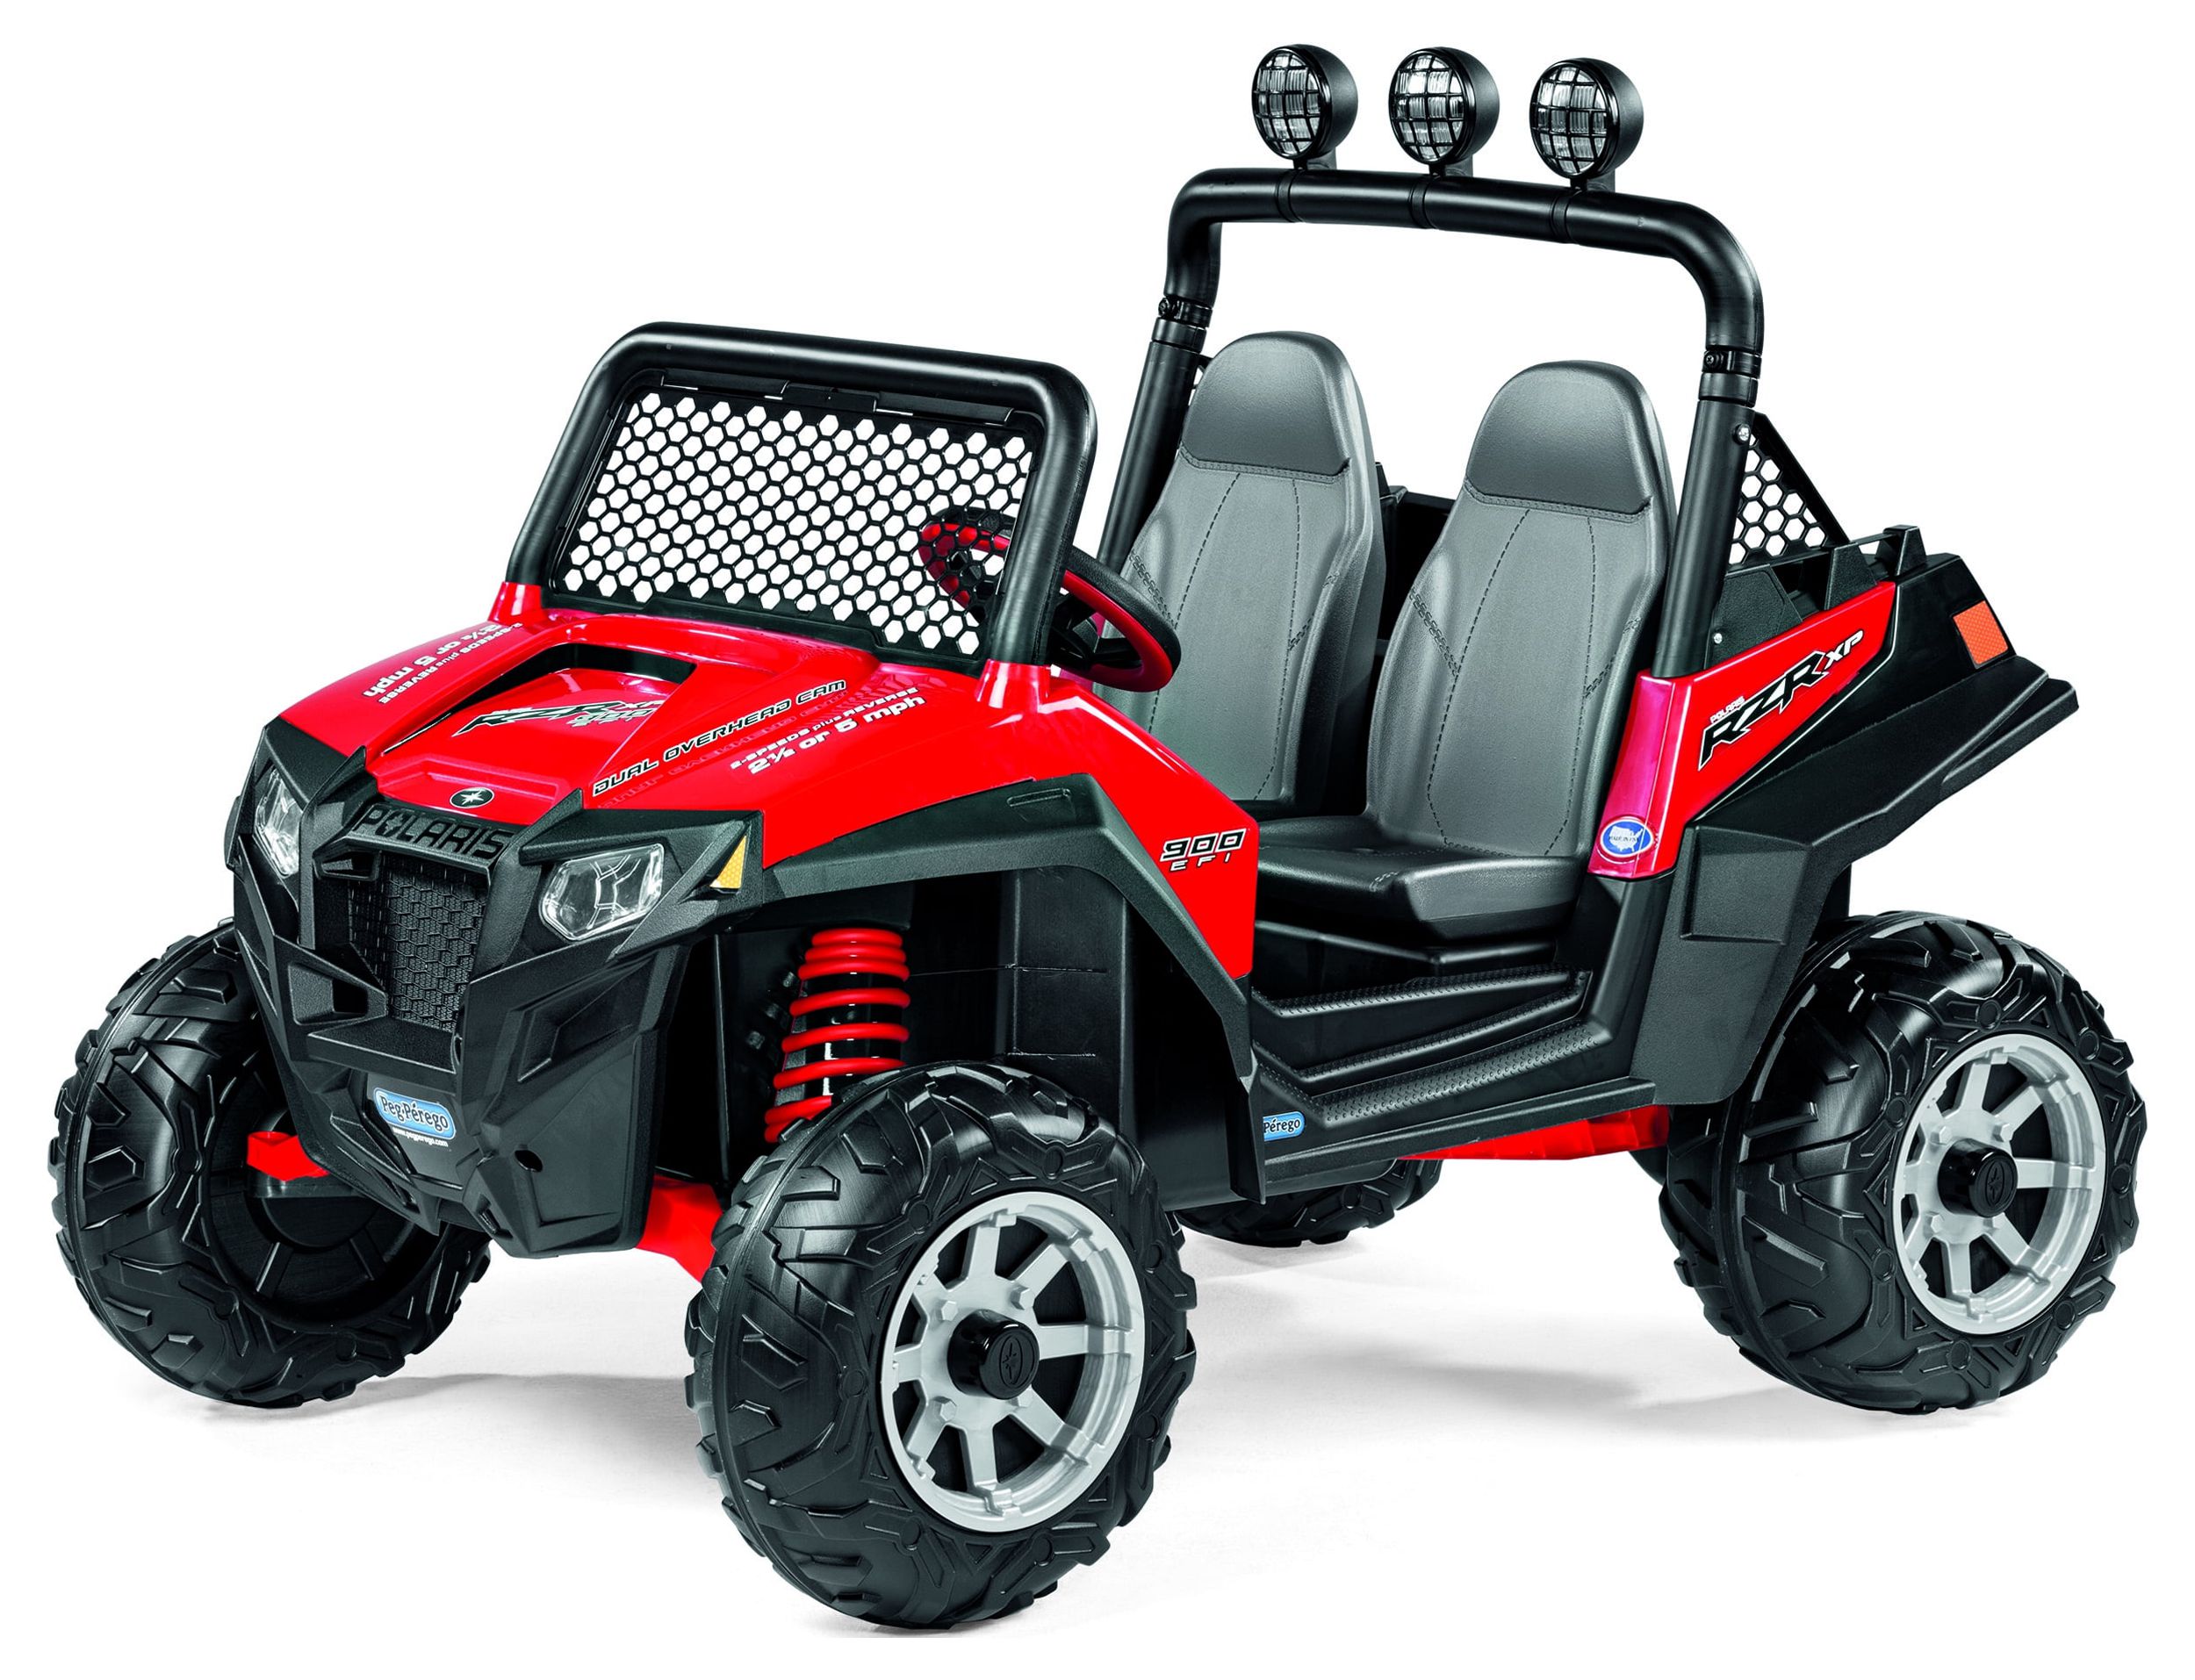 Peg Perego Polaris Ranger RZR 900 12-Volt Battery-Powered Ride-On, Red - image 4 of 9